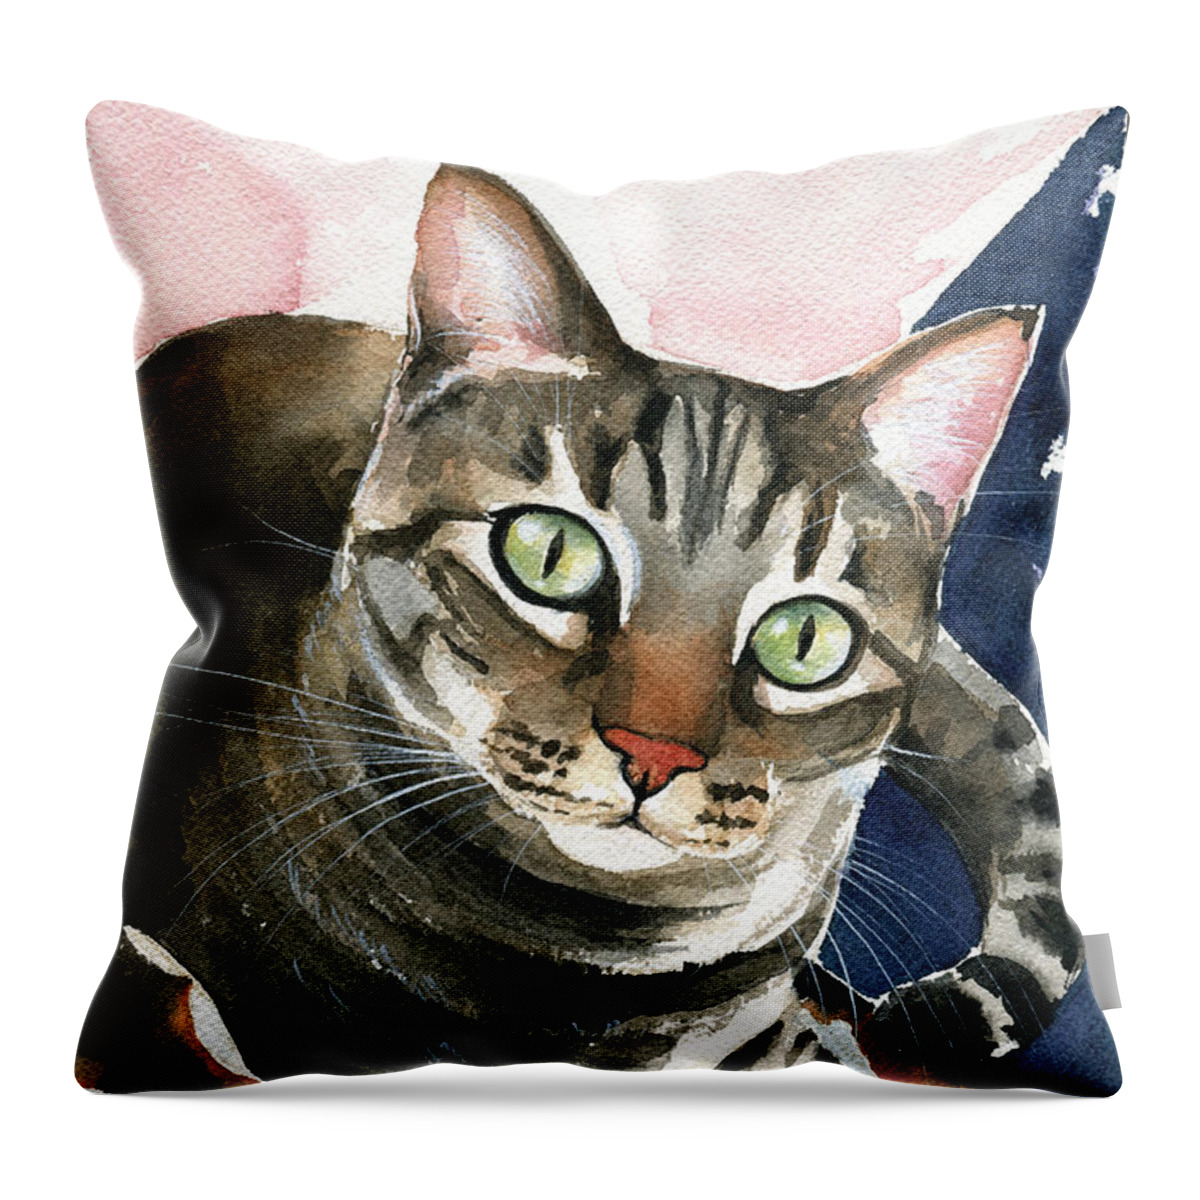 Ema Throw Pillow featuring the painting Miss Ema by Dora Hathazi Mendes